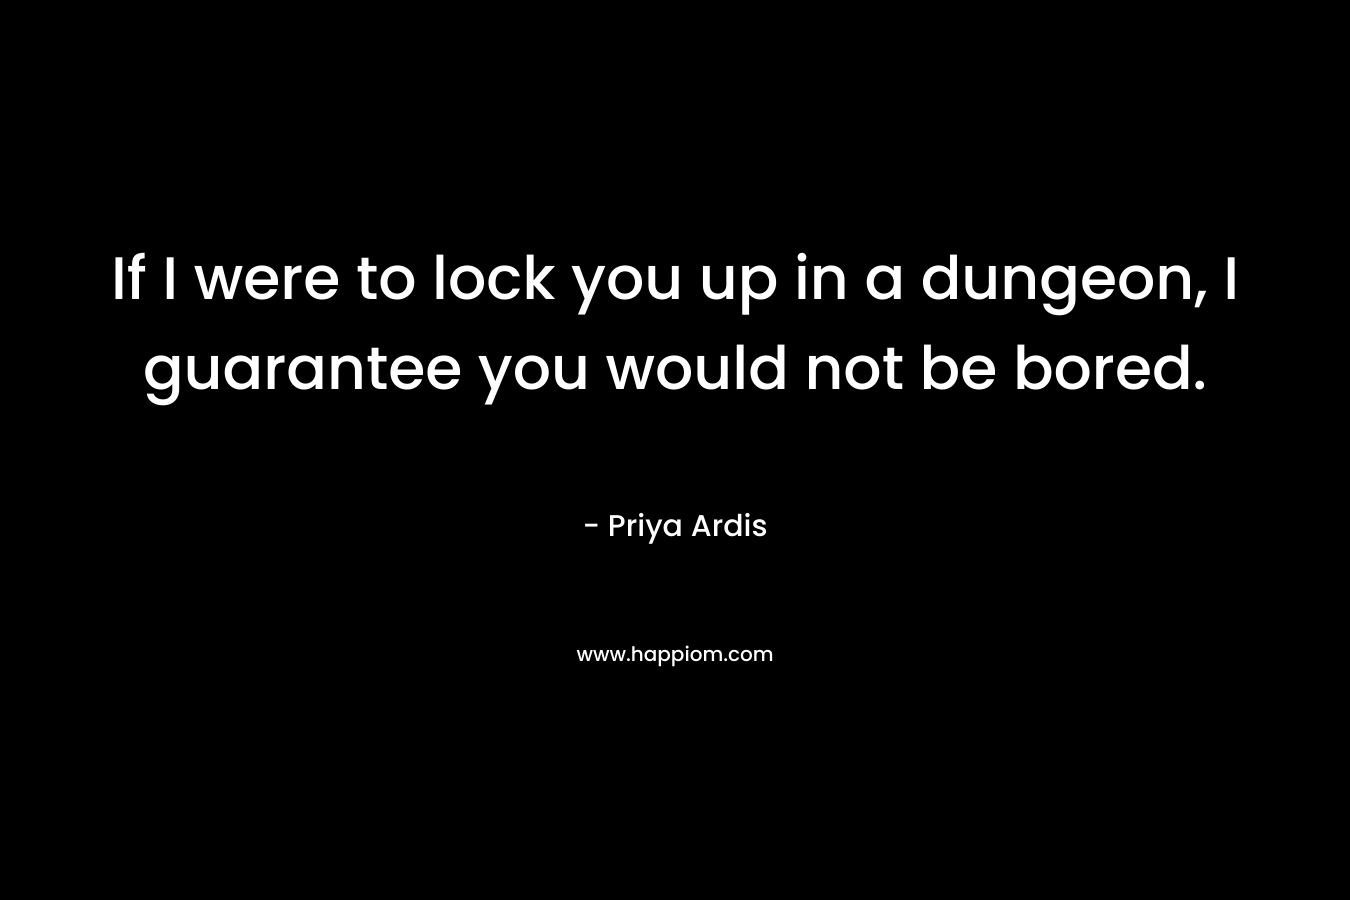 If I were to lock you up in a dungeon, I guarantee you would not be bored.